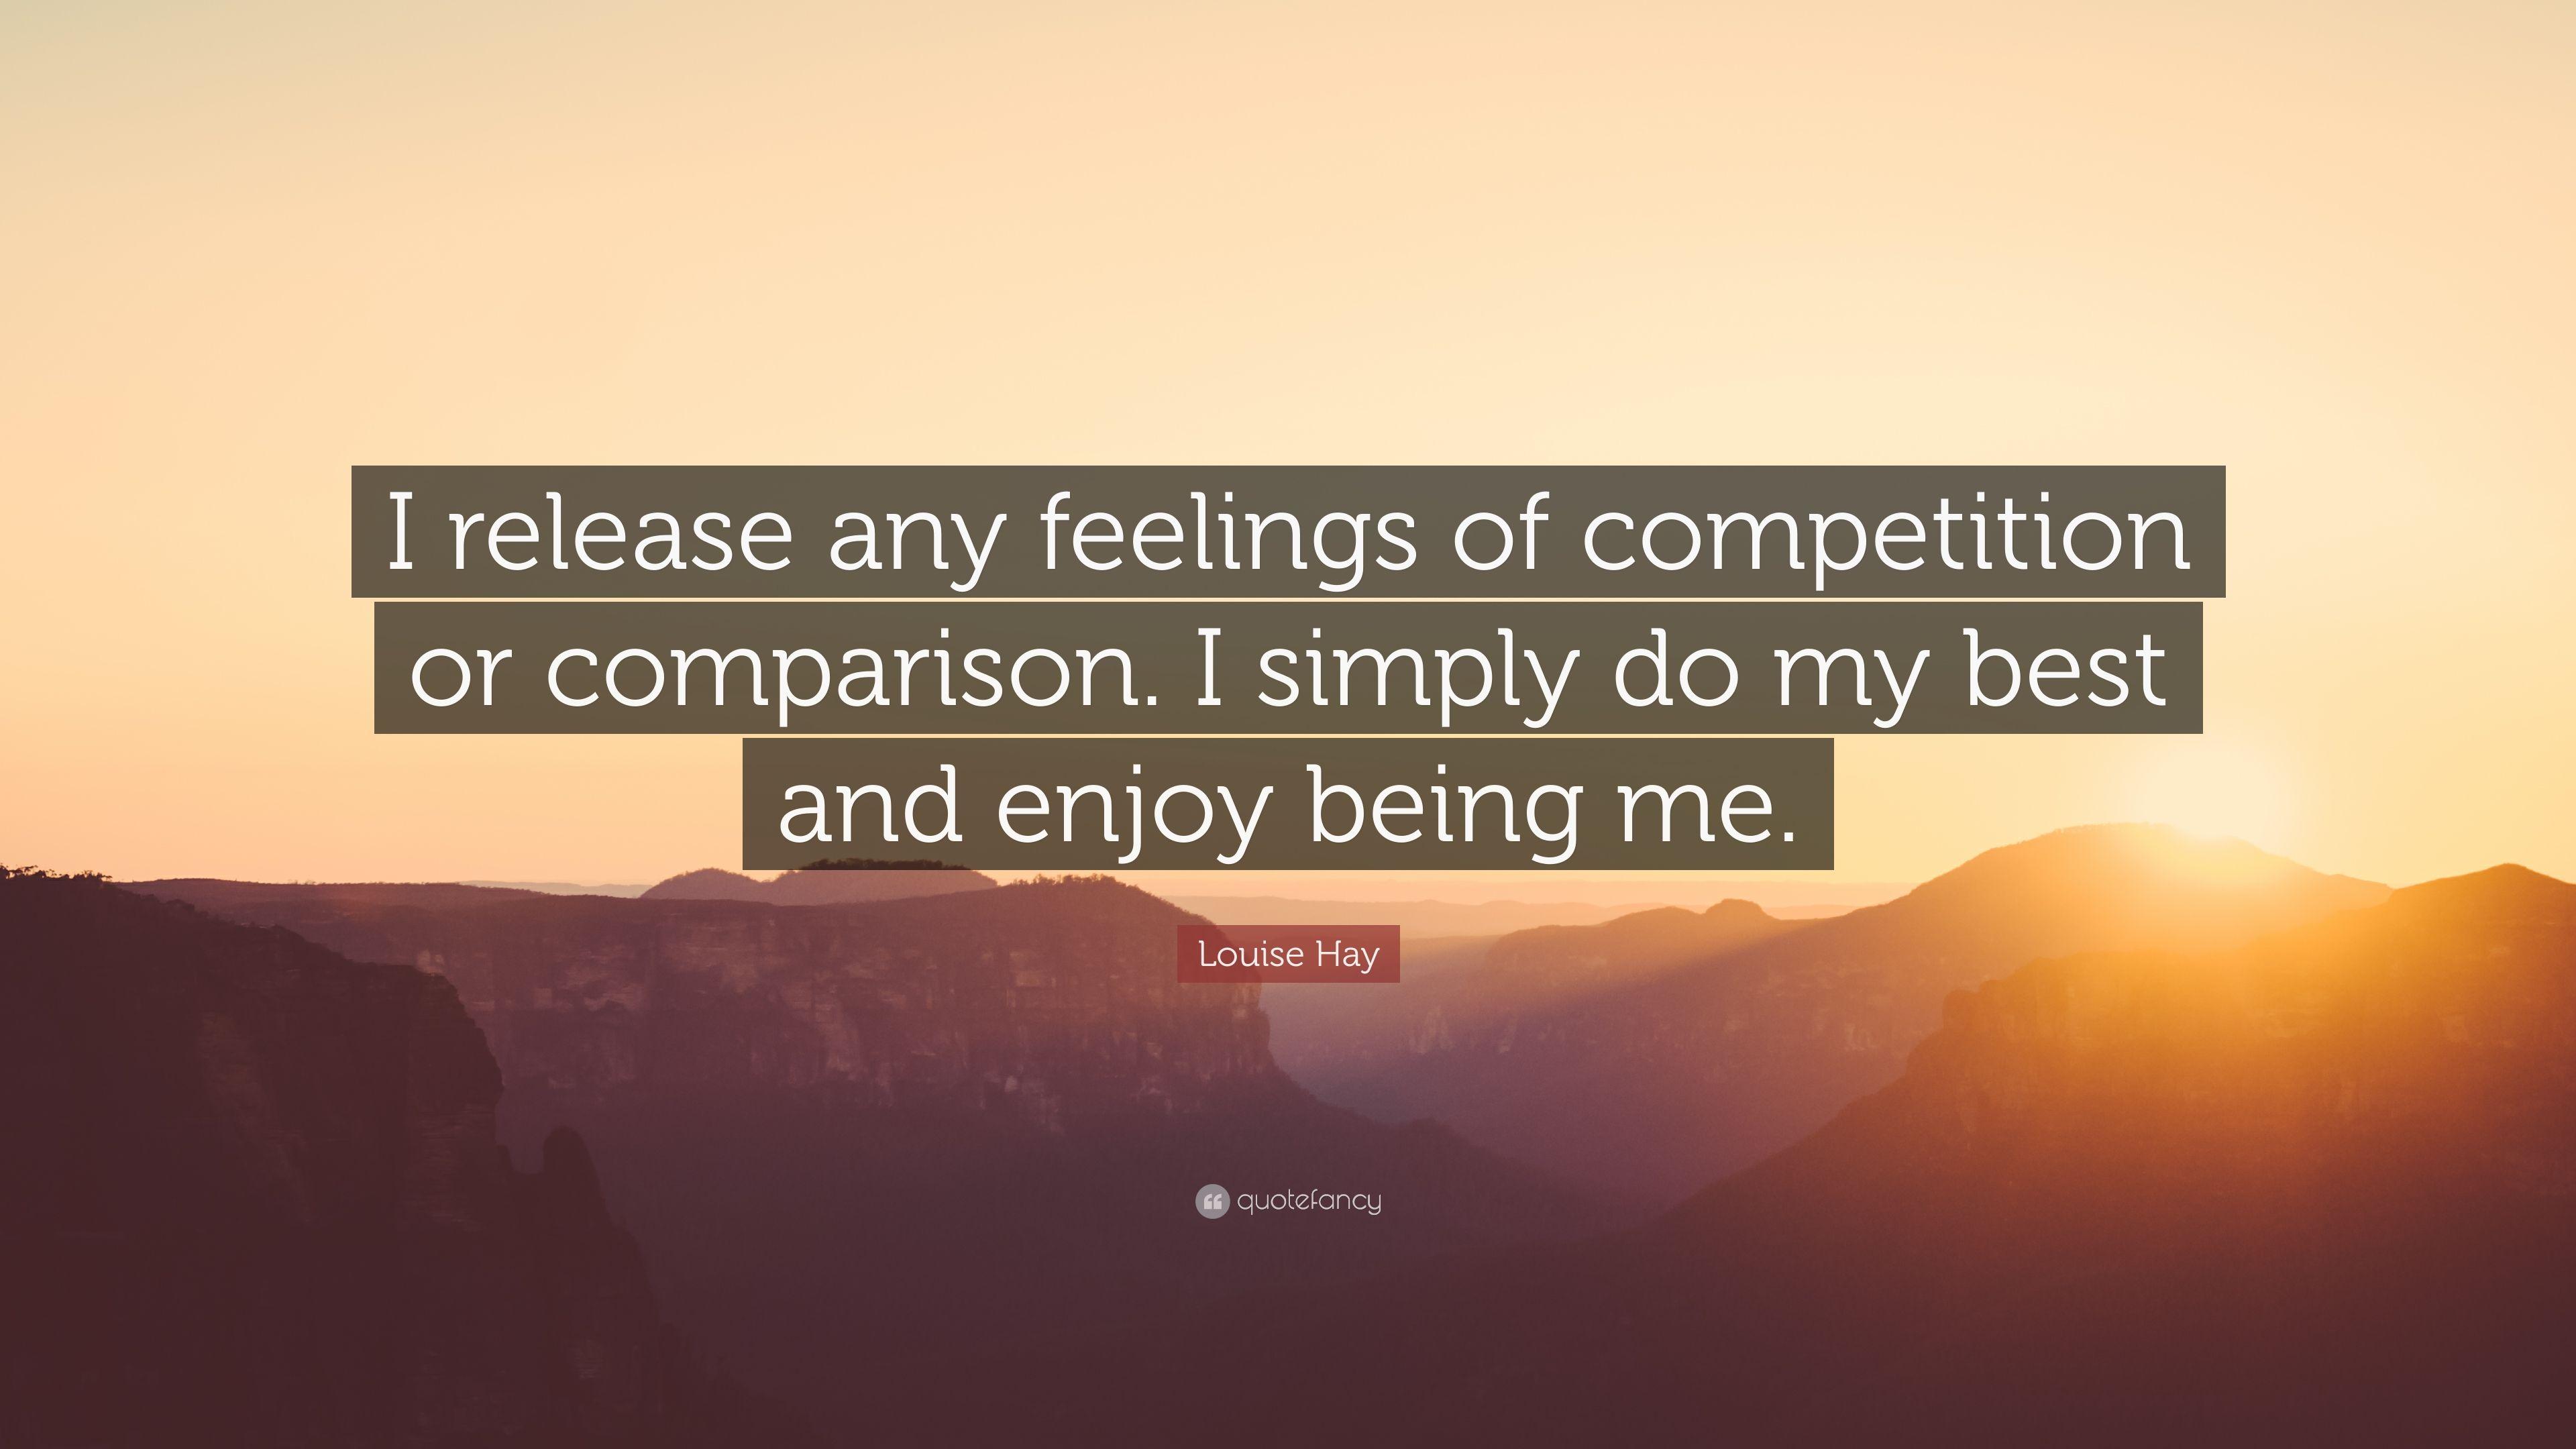 Louise Hay Quote: “I release any feelings of competition or